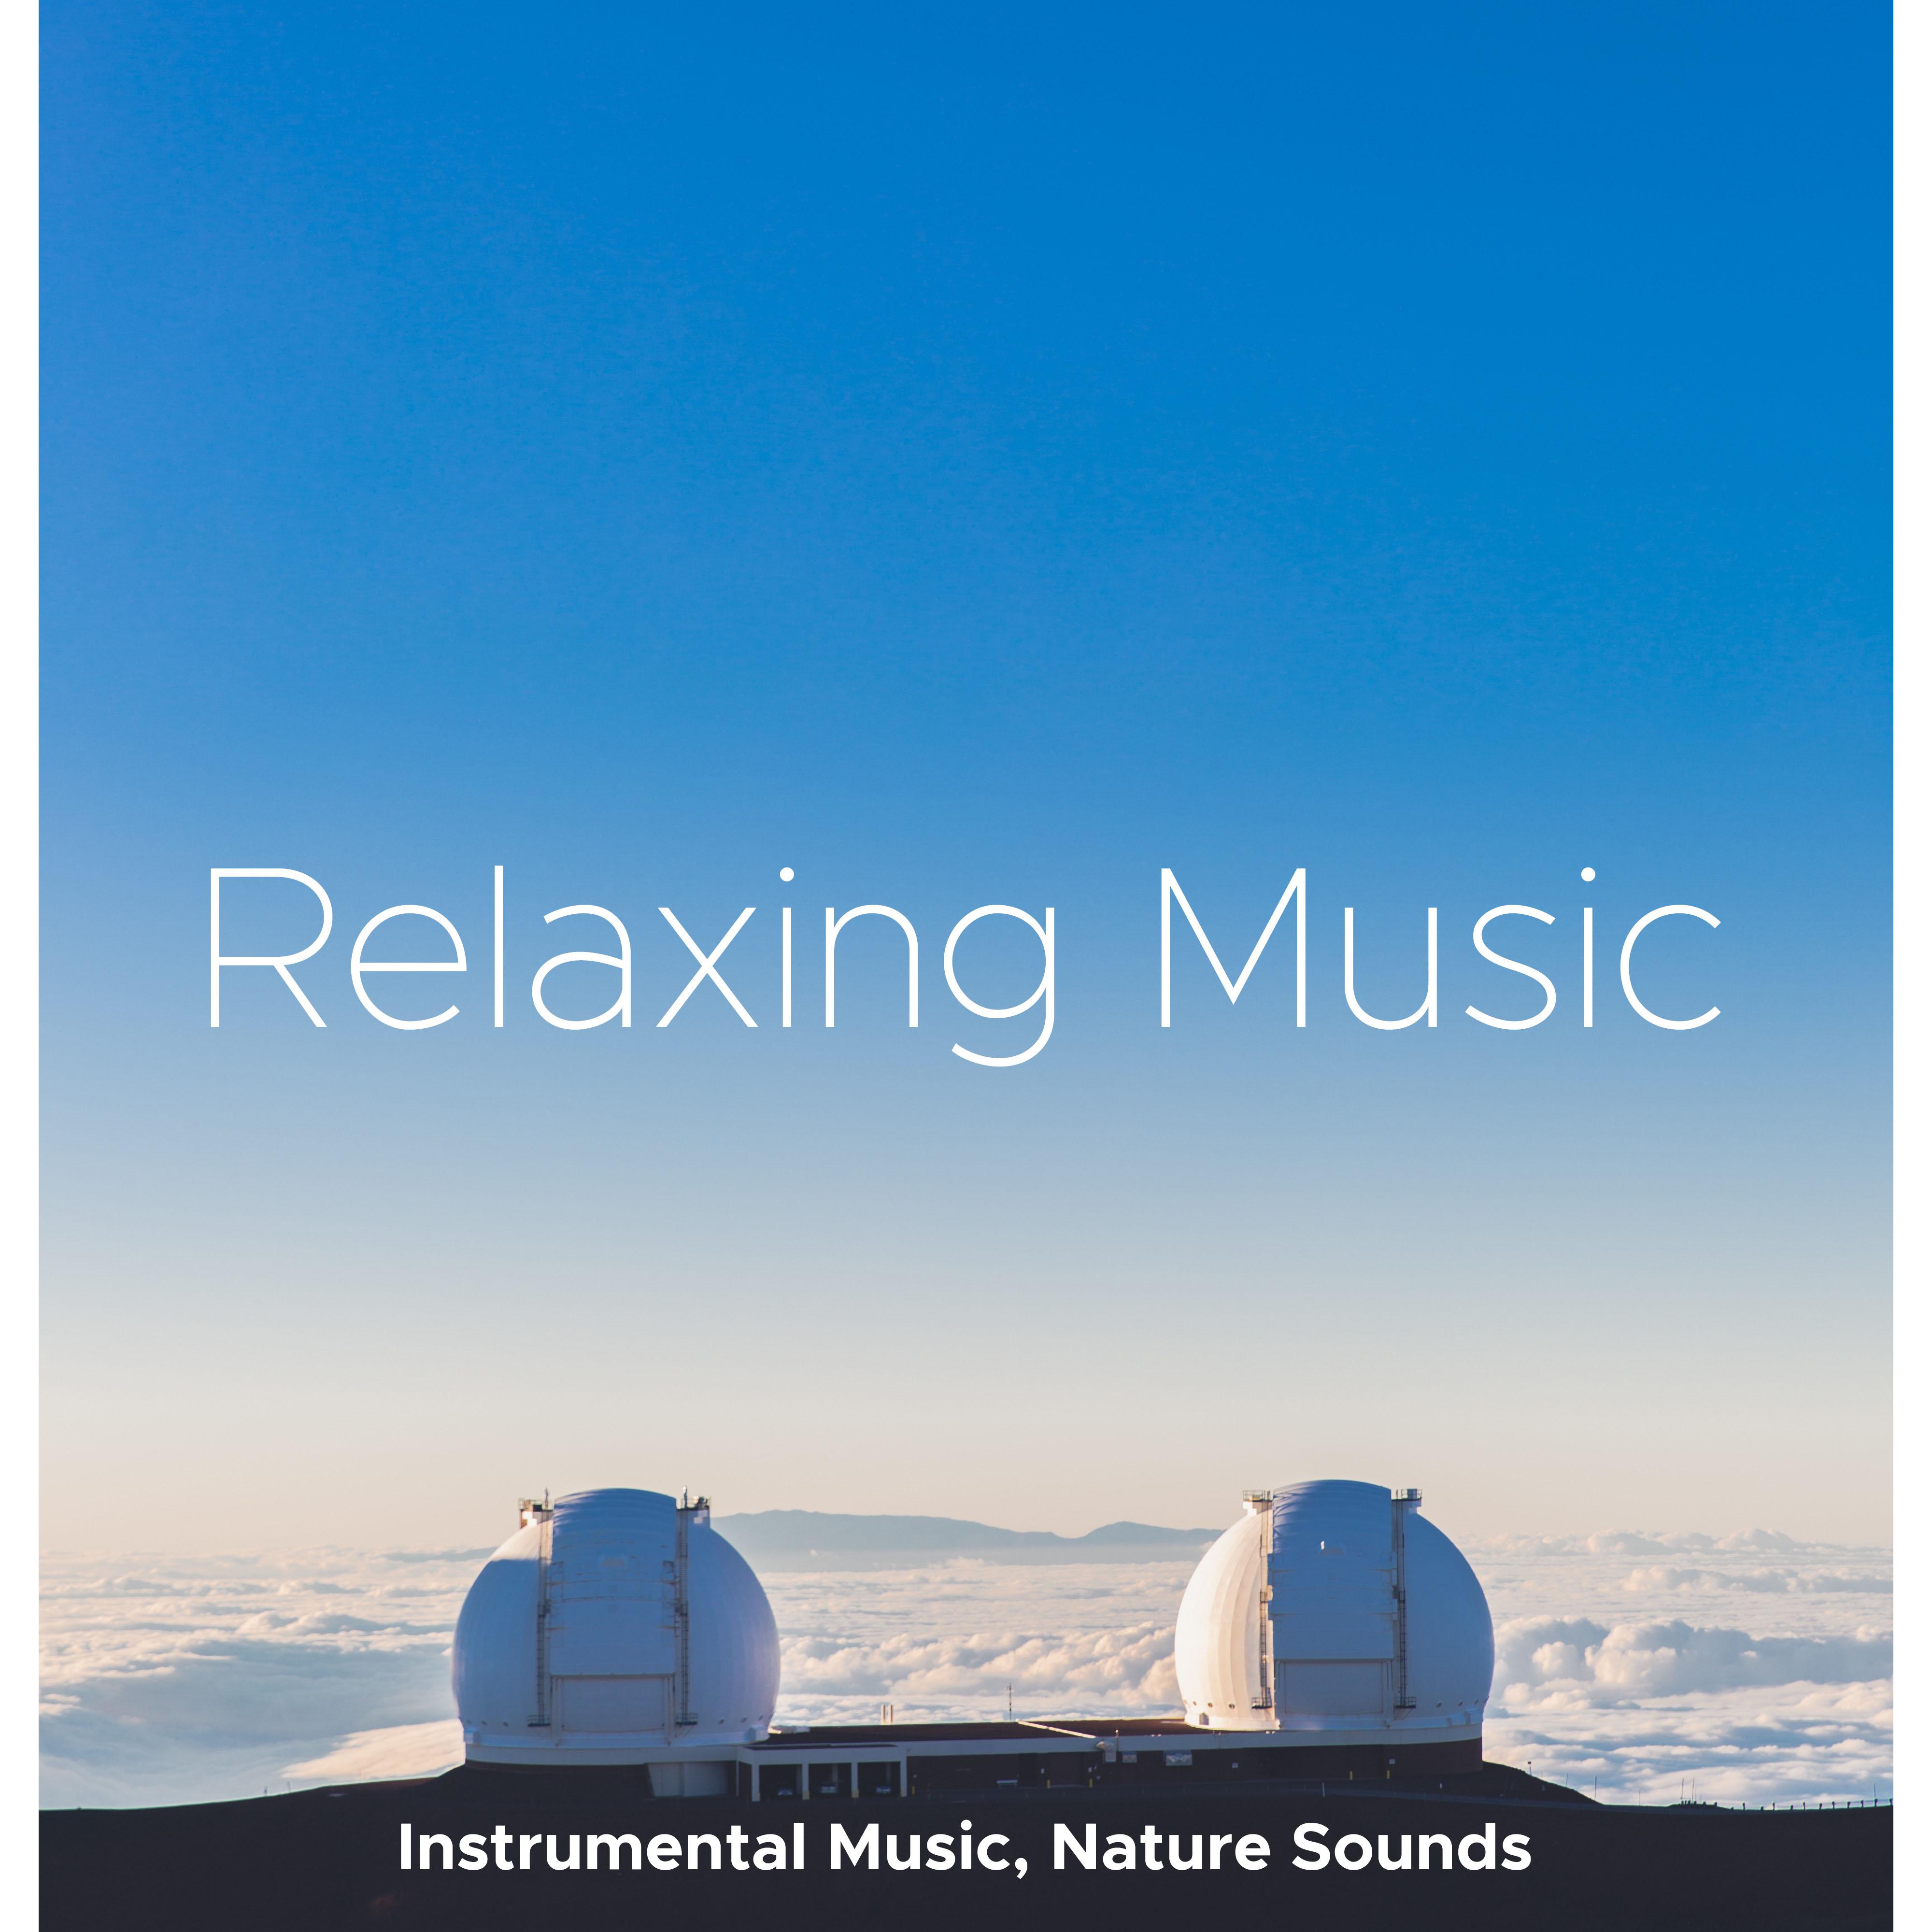 Relaxing Music - Instrumental Music, Nature Sounds